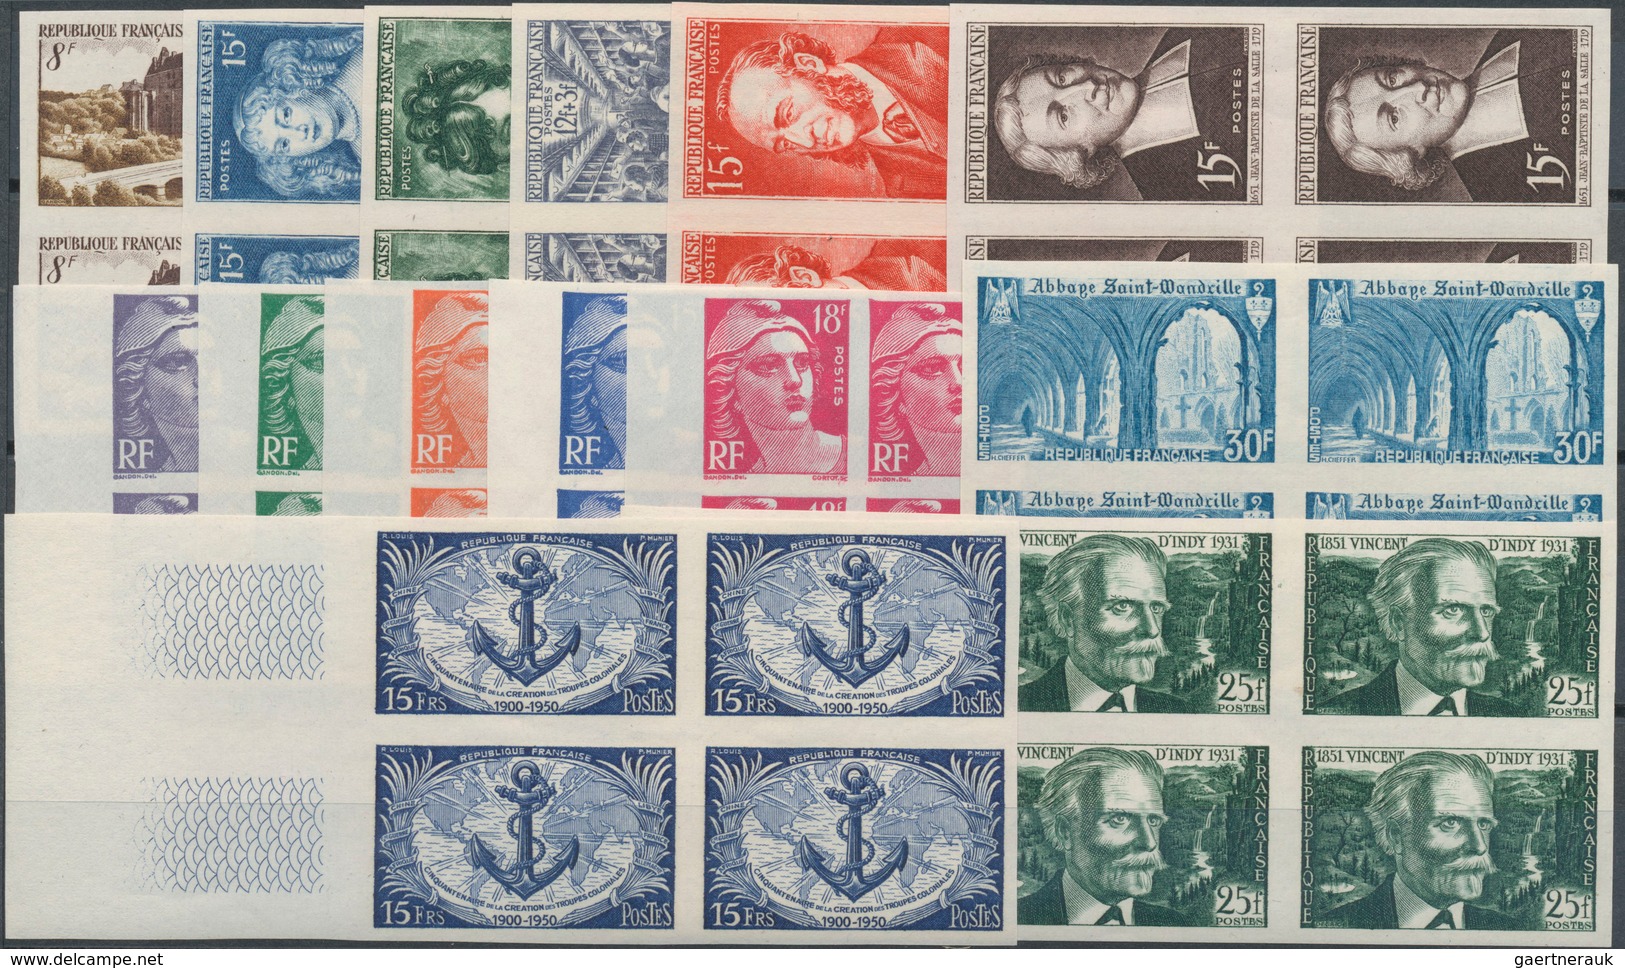 Frankreich: 1941/1974, IMPERFORATE ISSUES, MNH Collection Of Imperforate Blocks Of Four, Well Sorted - Sammlungen